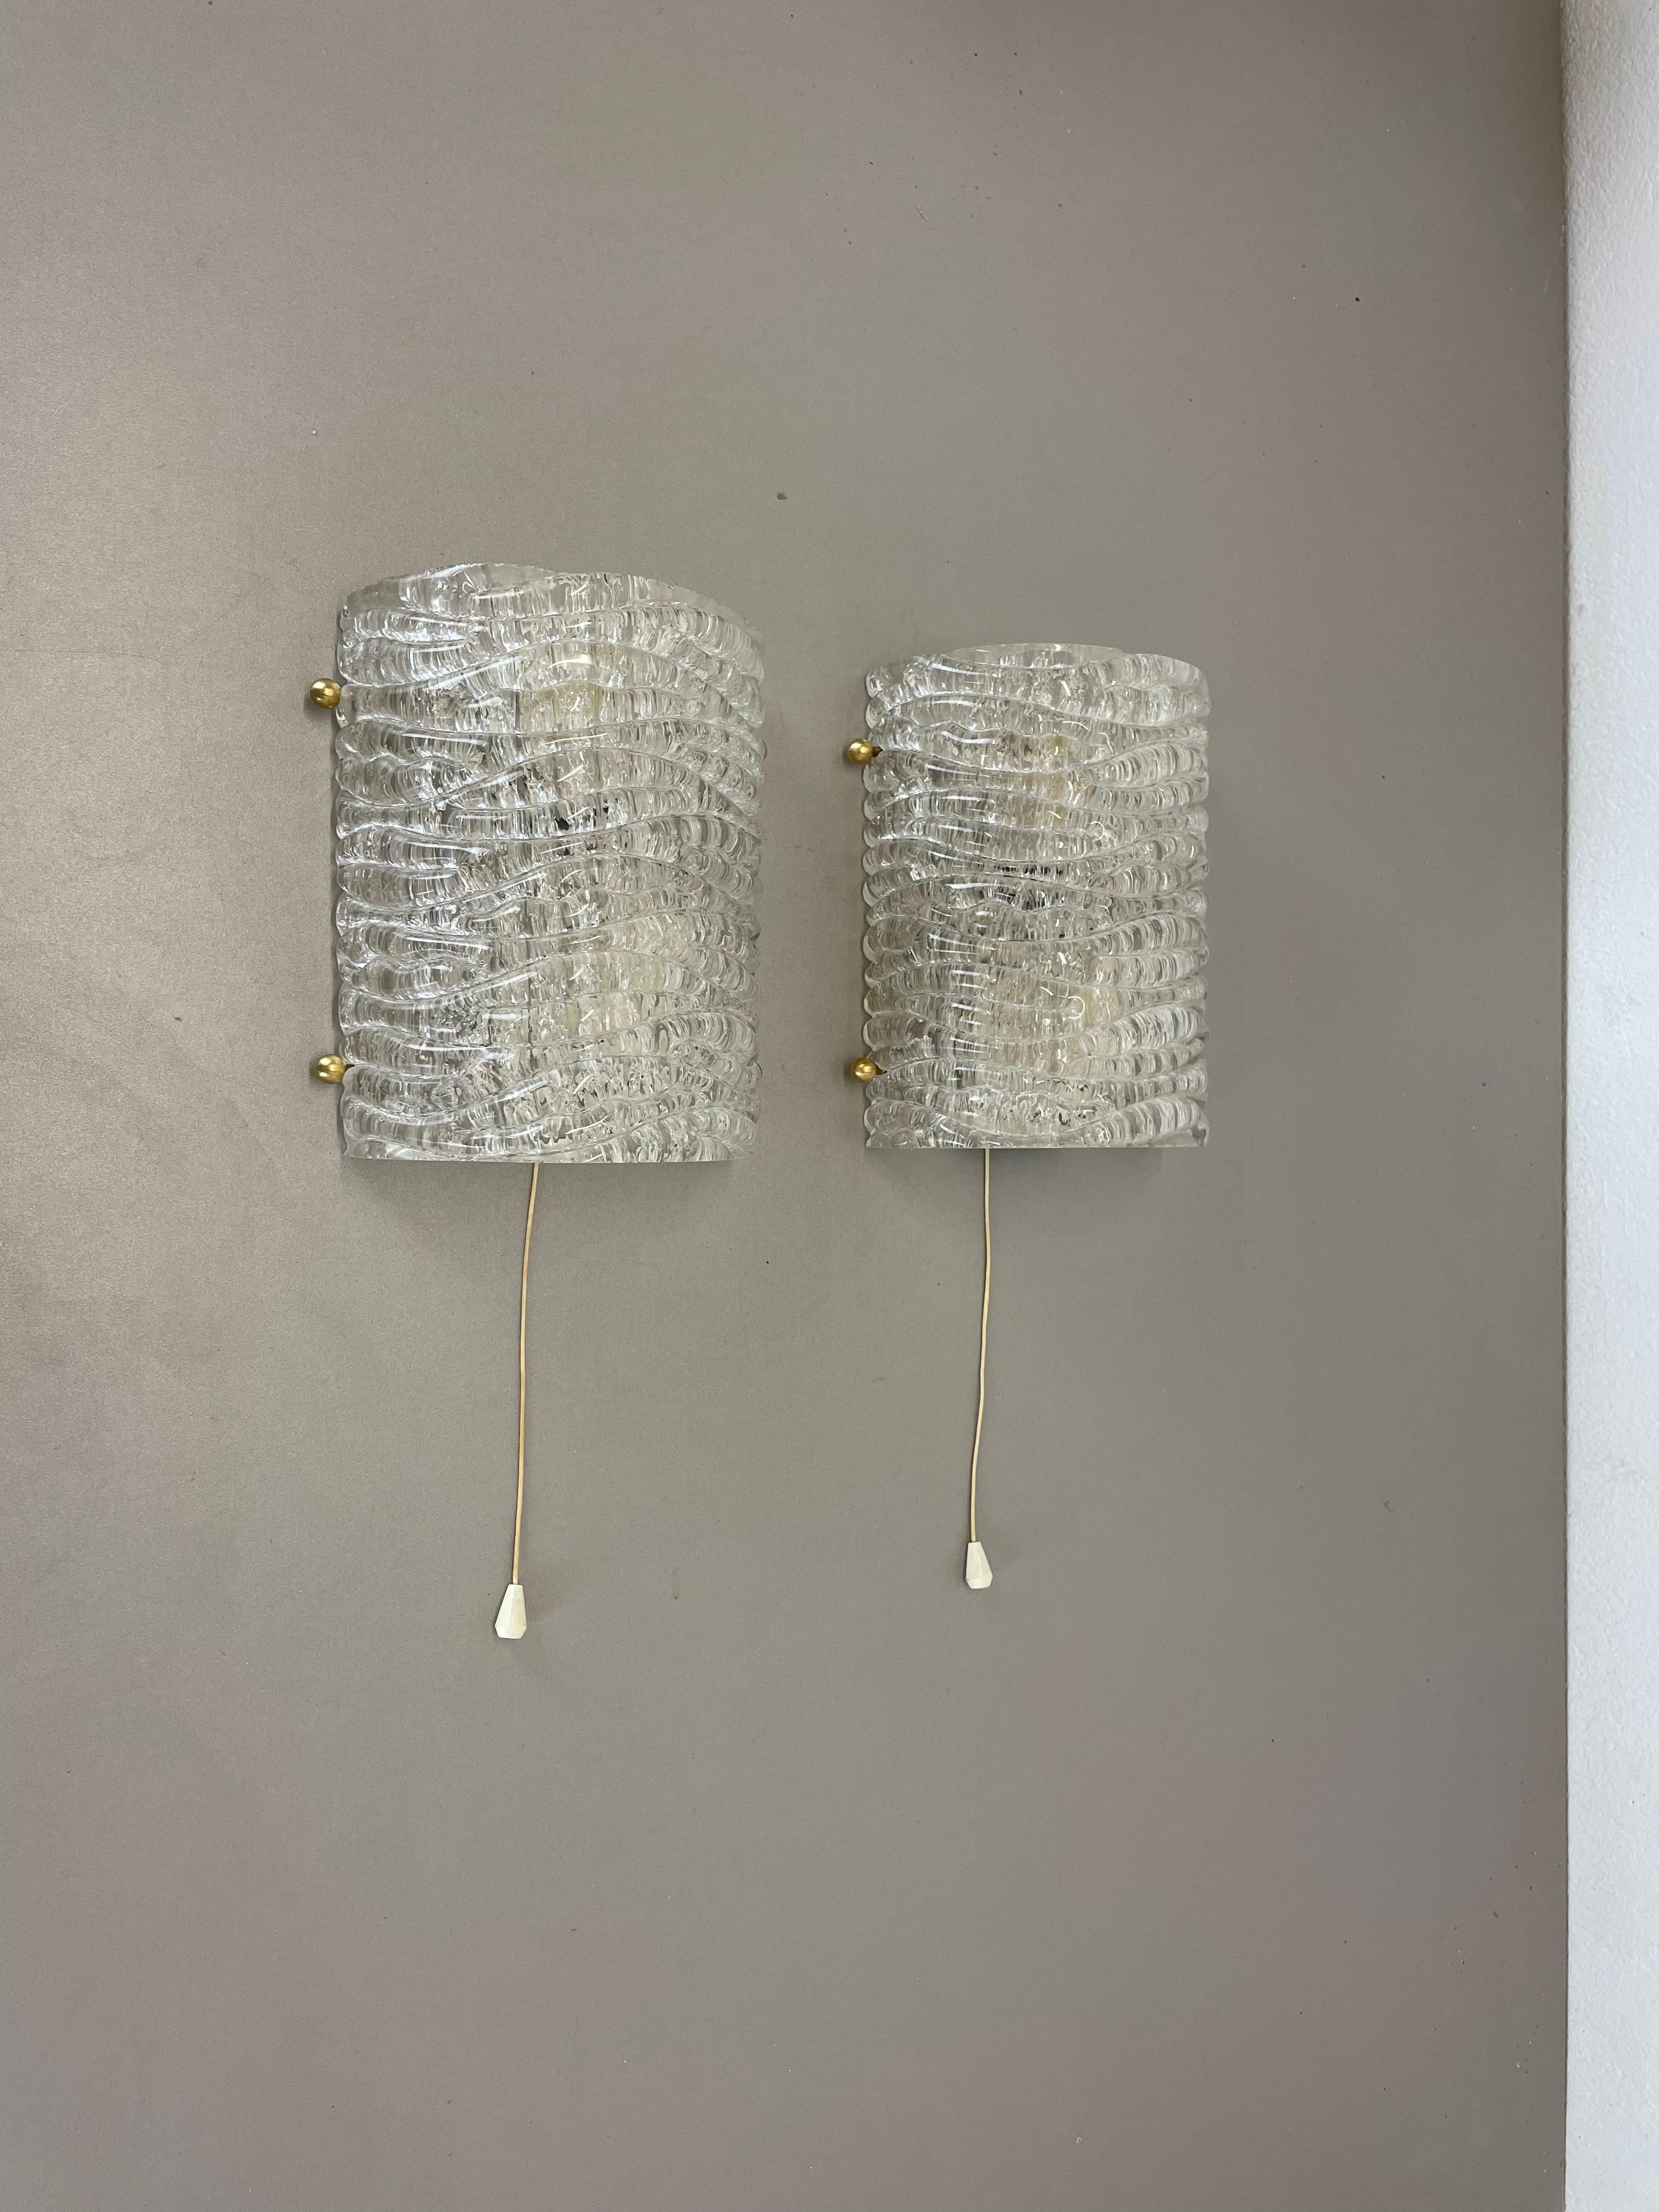 Article:

Set of two

Wall light sconces


Origin:

Germany



Age:

1970s



This set of two modernist lights was produced in Germany in the 1970s. It is made from heavy glass and has a metal wall fixation. The lights have a fantastic abstract and